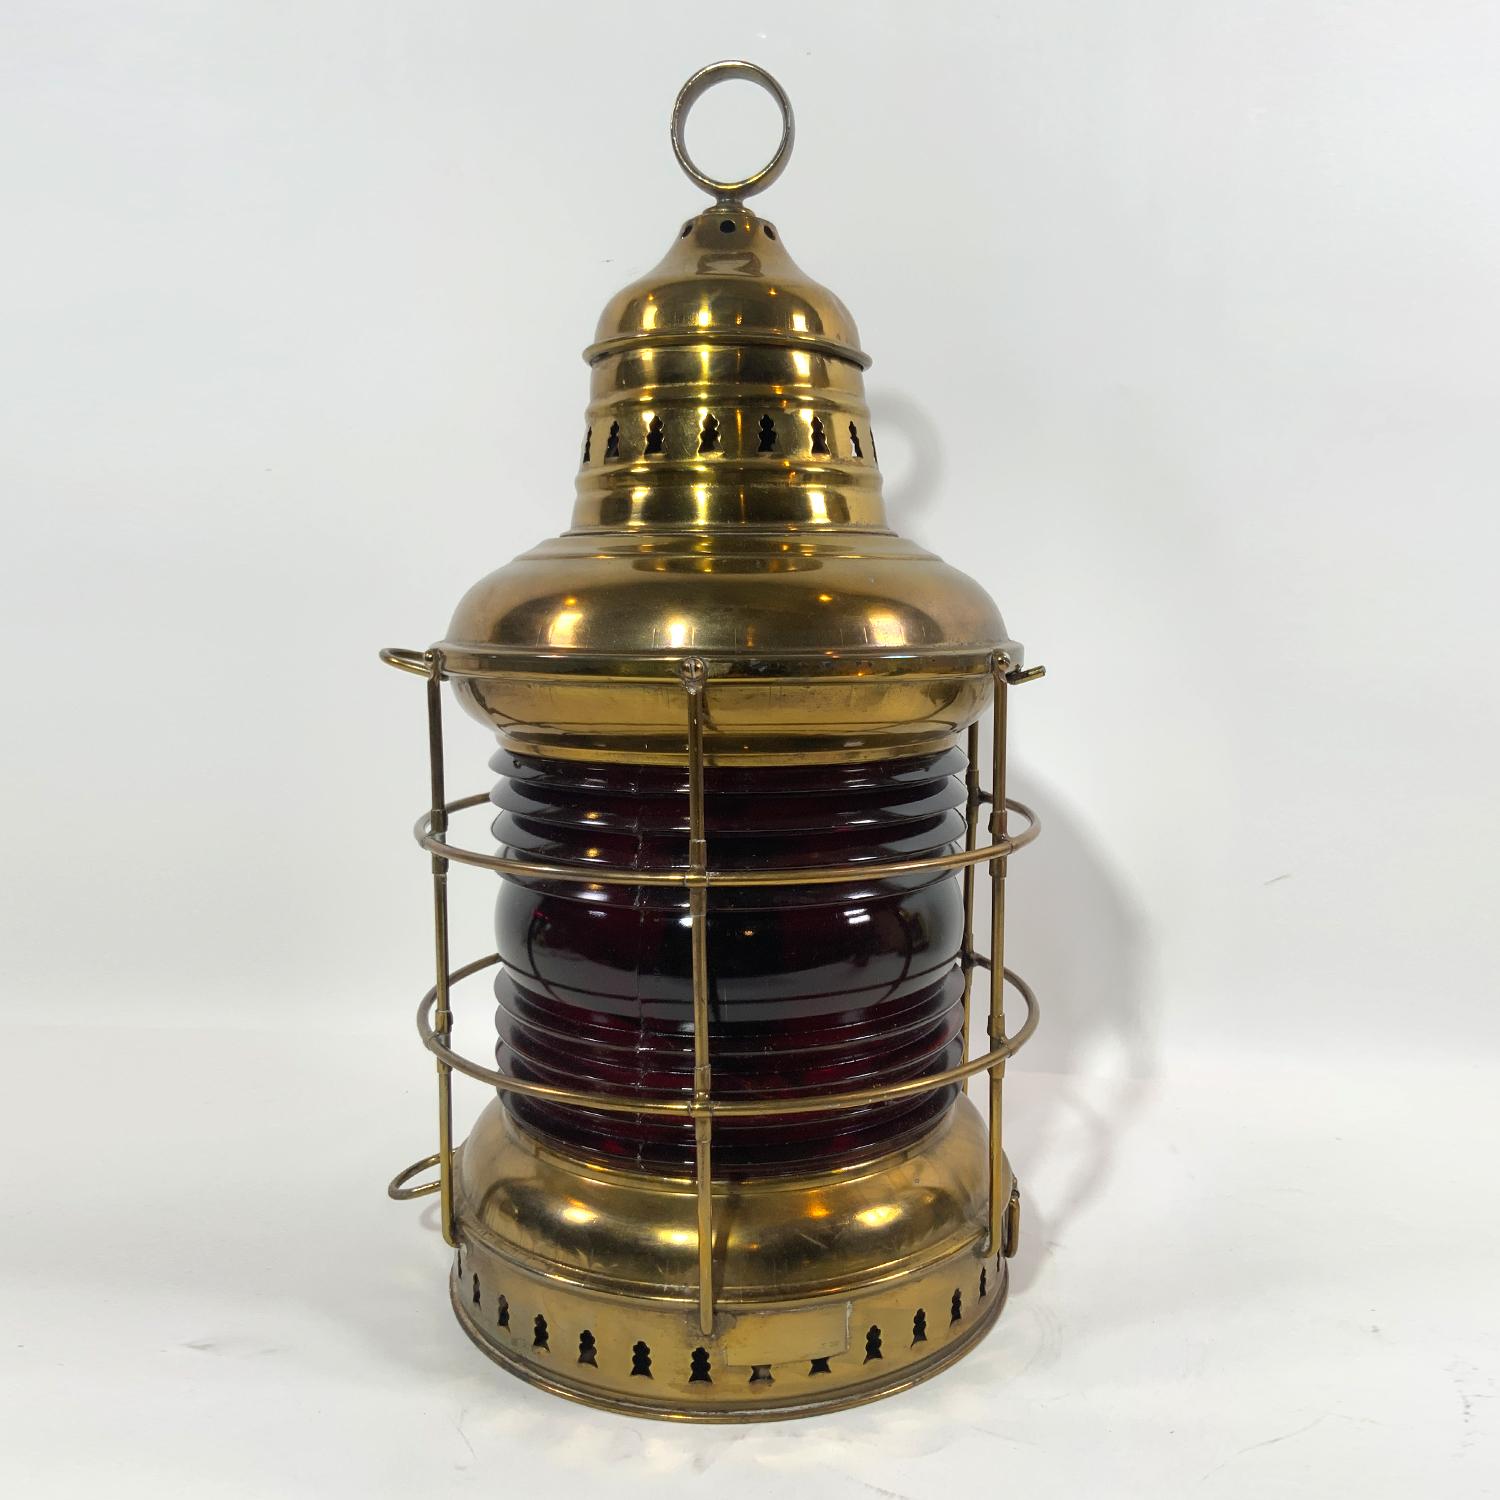 Brass ships anchor lantern with a really rich port wine red fresnel lens by Perkins Marine Lamp Corporation of Brooklyn, New York. Vented top and hoisting ring. Fitted with original burner. Circa 1925. Crack in lens is reflected in price. Please